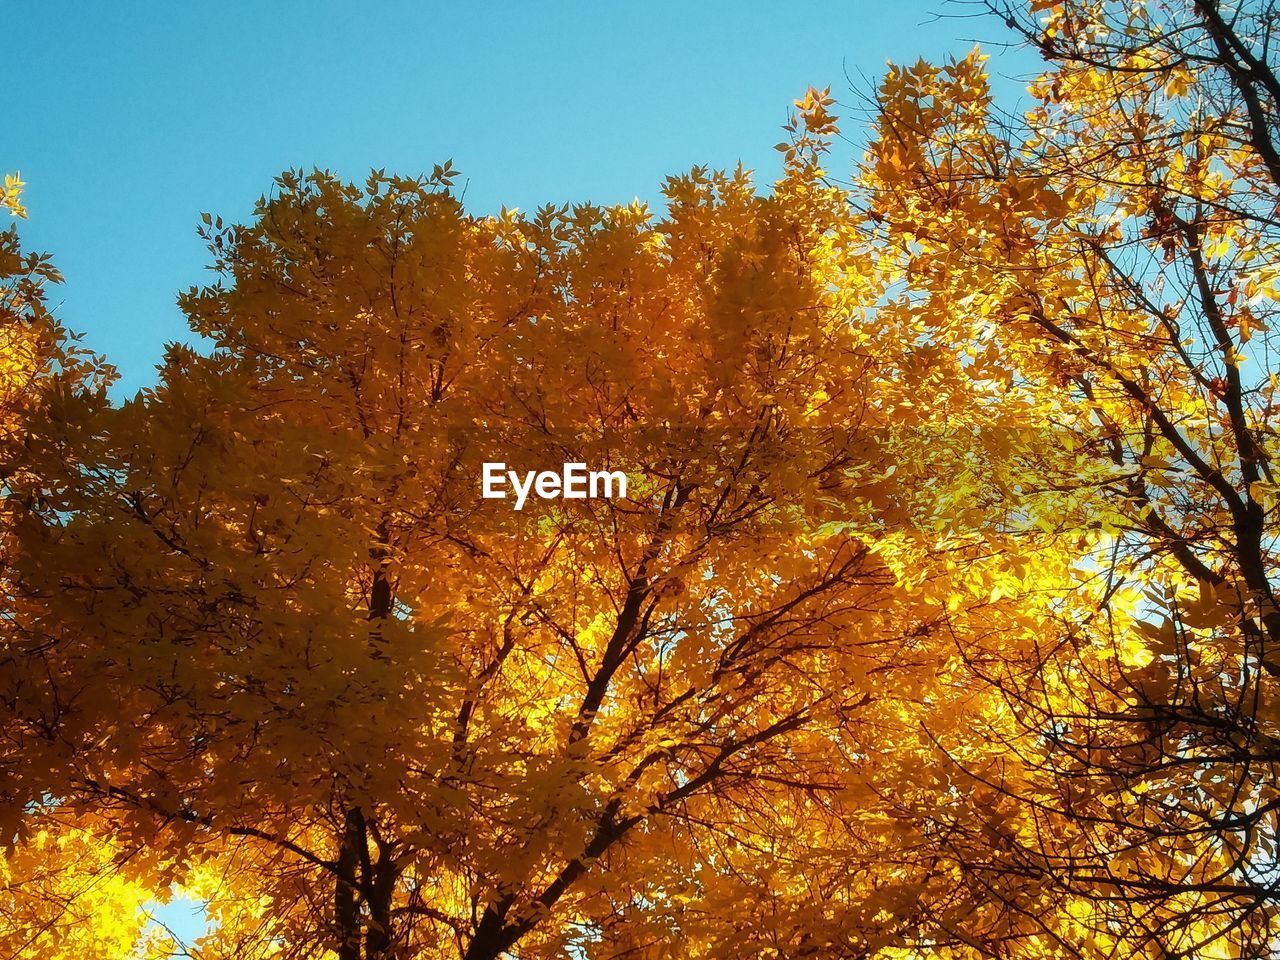 LOW ANGLE VIEW OF TREES AGAINST SKY DURING AUTUMN